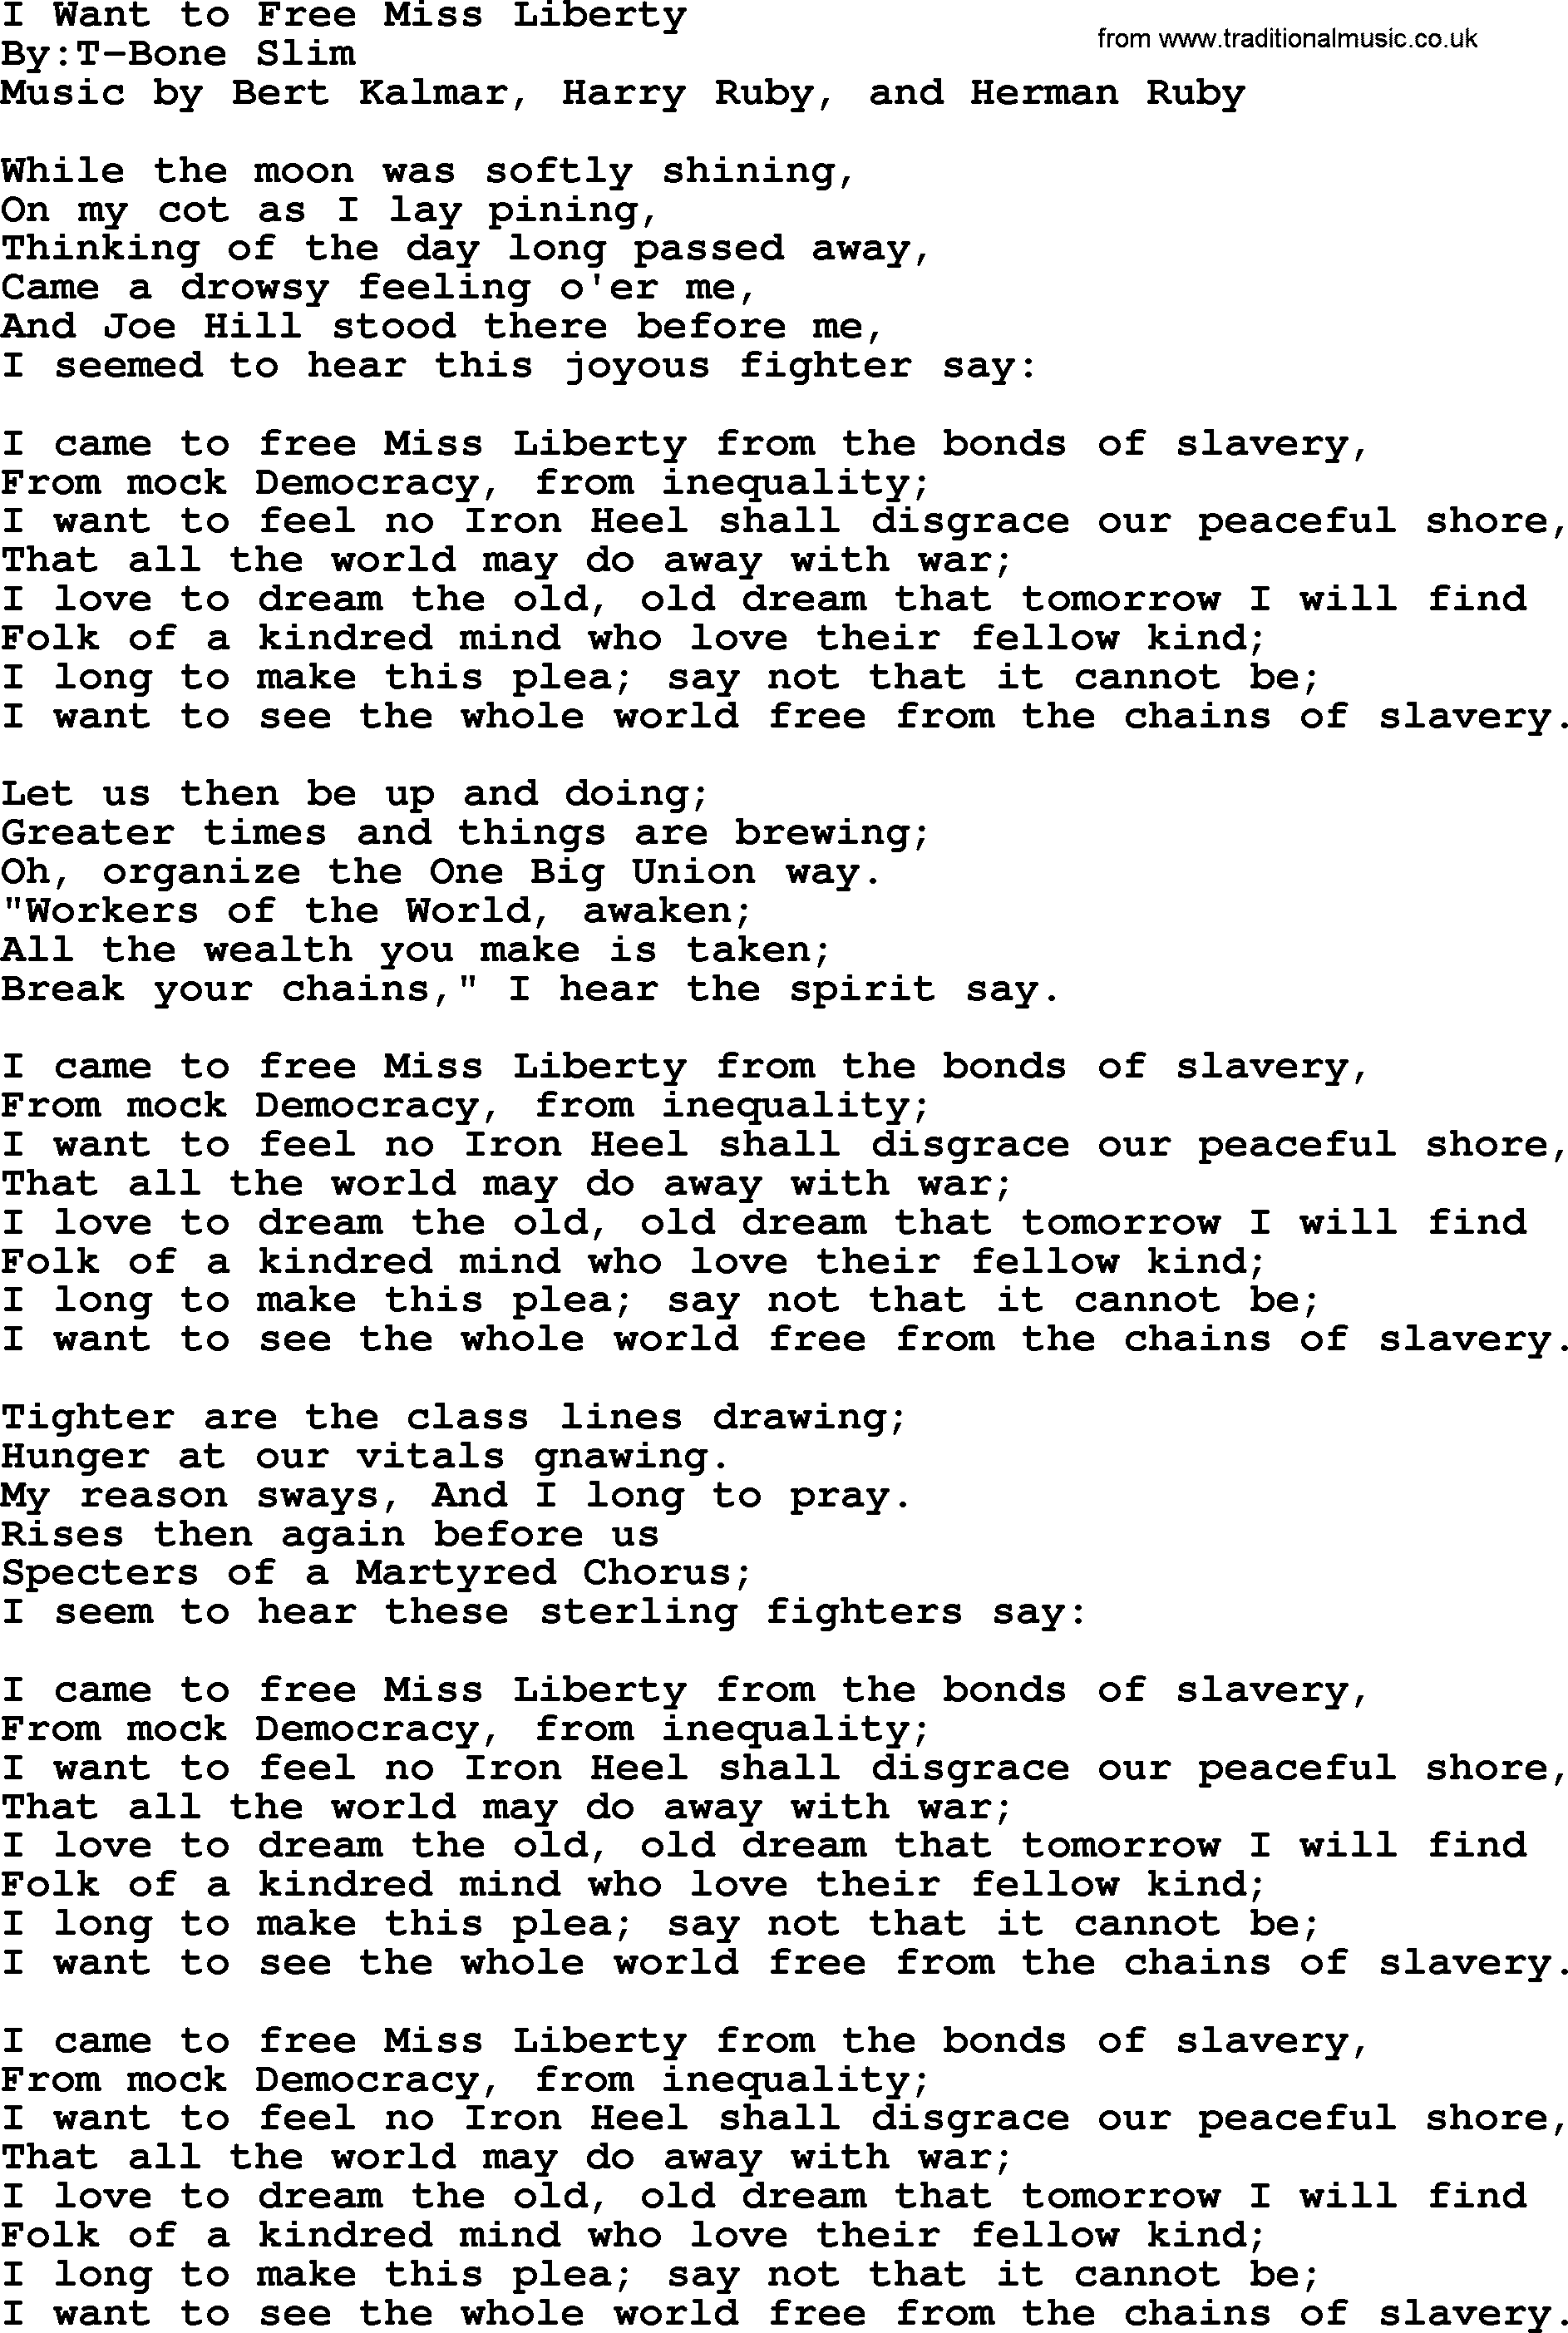 Political, Solidarity, Workers or Union song: I Want To Free Miss Liberty, lyrics